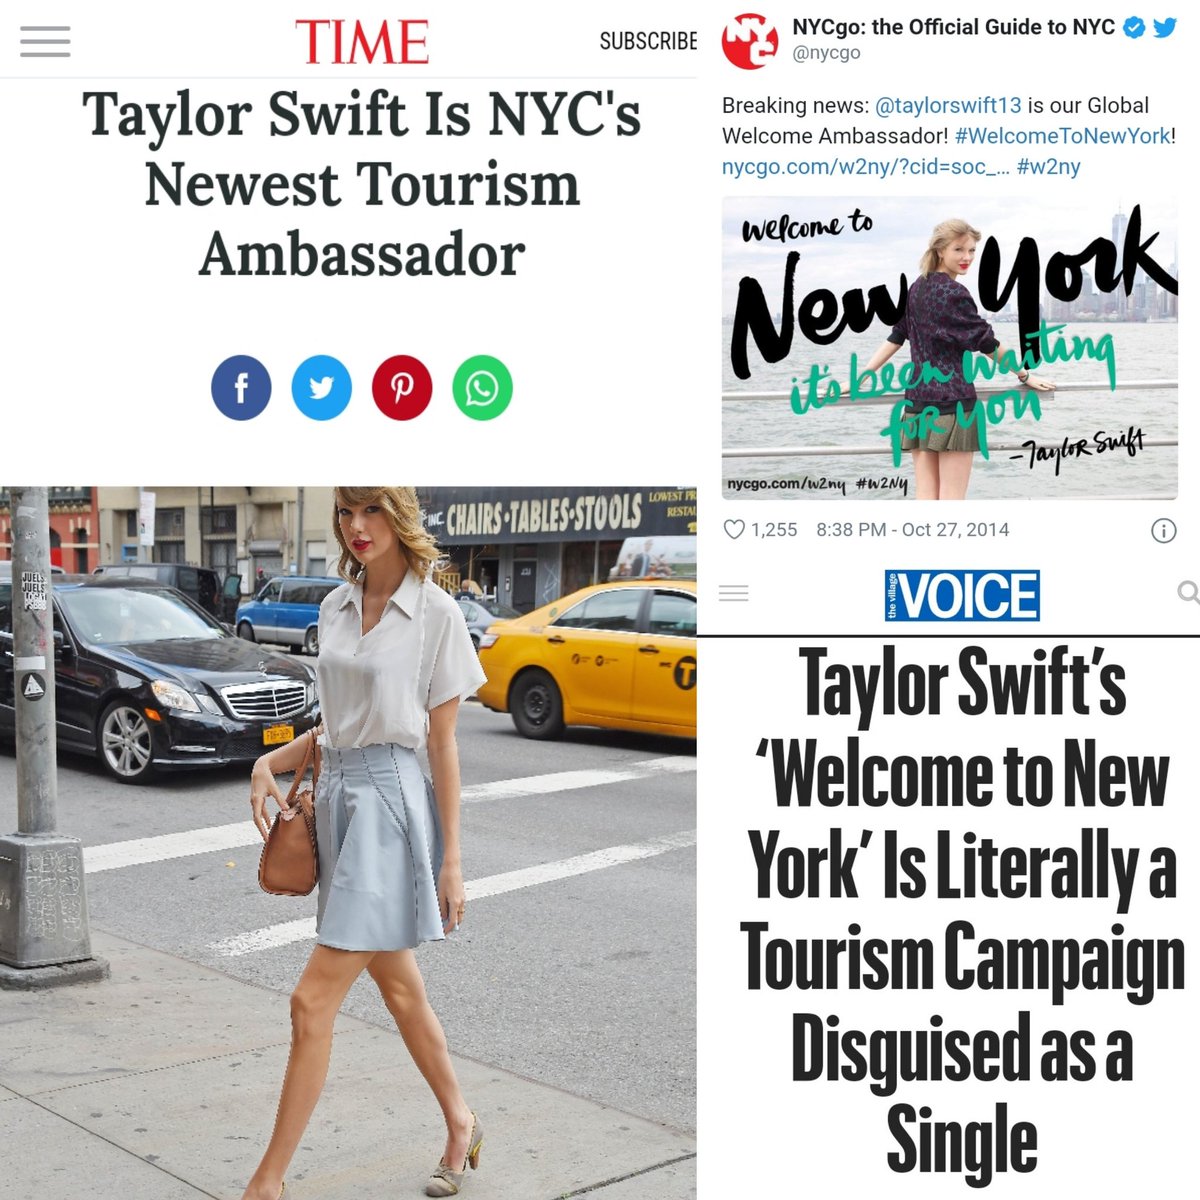 After moving to New York, NYC & Company proclaimed Swift as New York City's Global Welcoming Ambassador because of the spike in its global searches due to Taylor Swift's song "Welcome To New York".